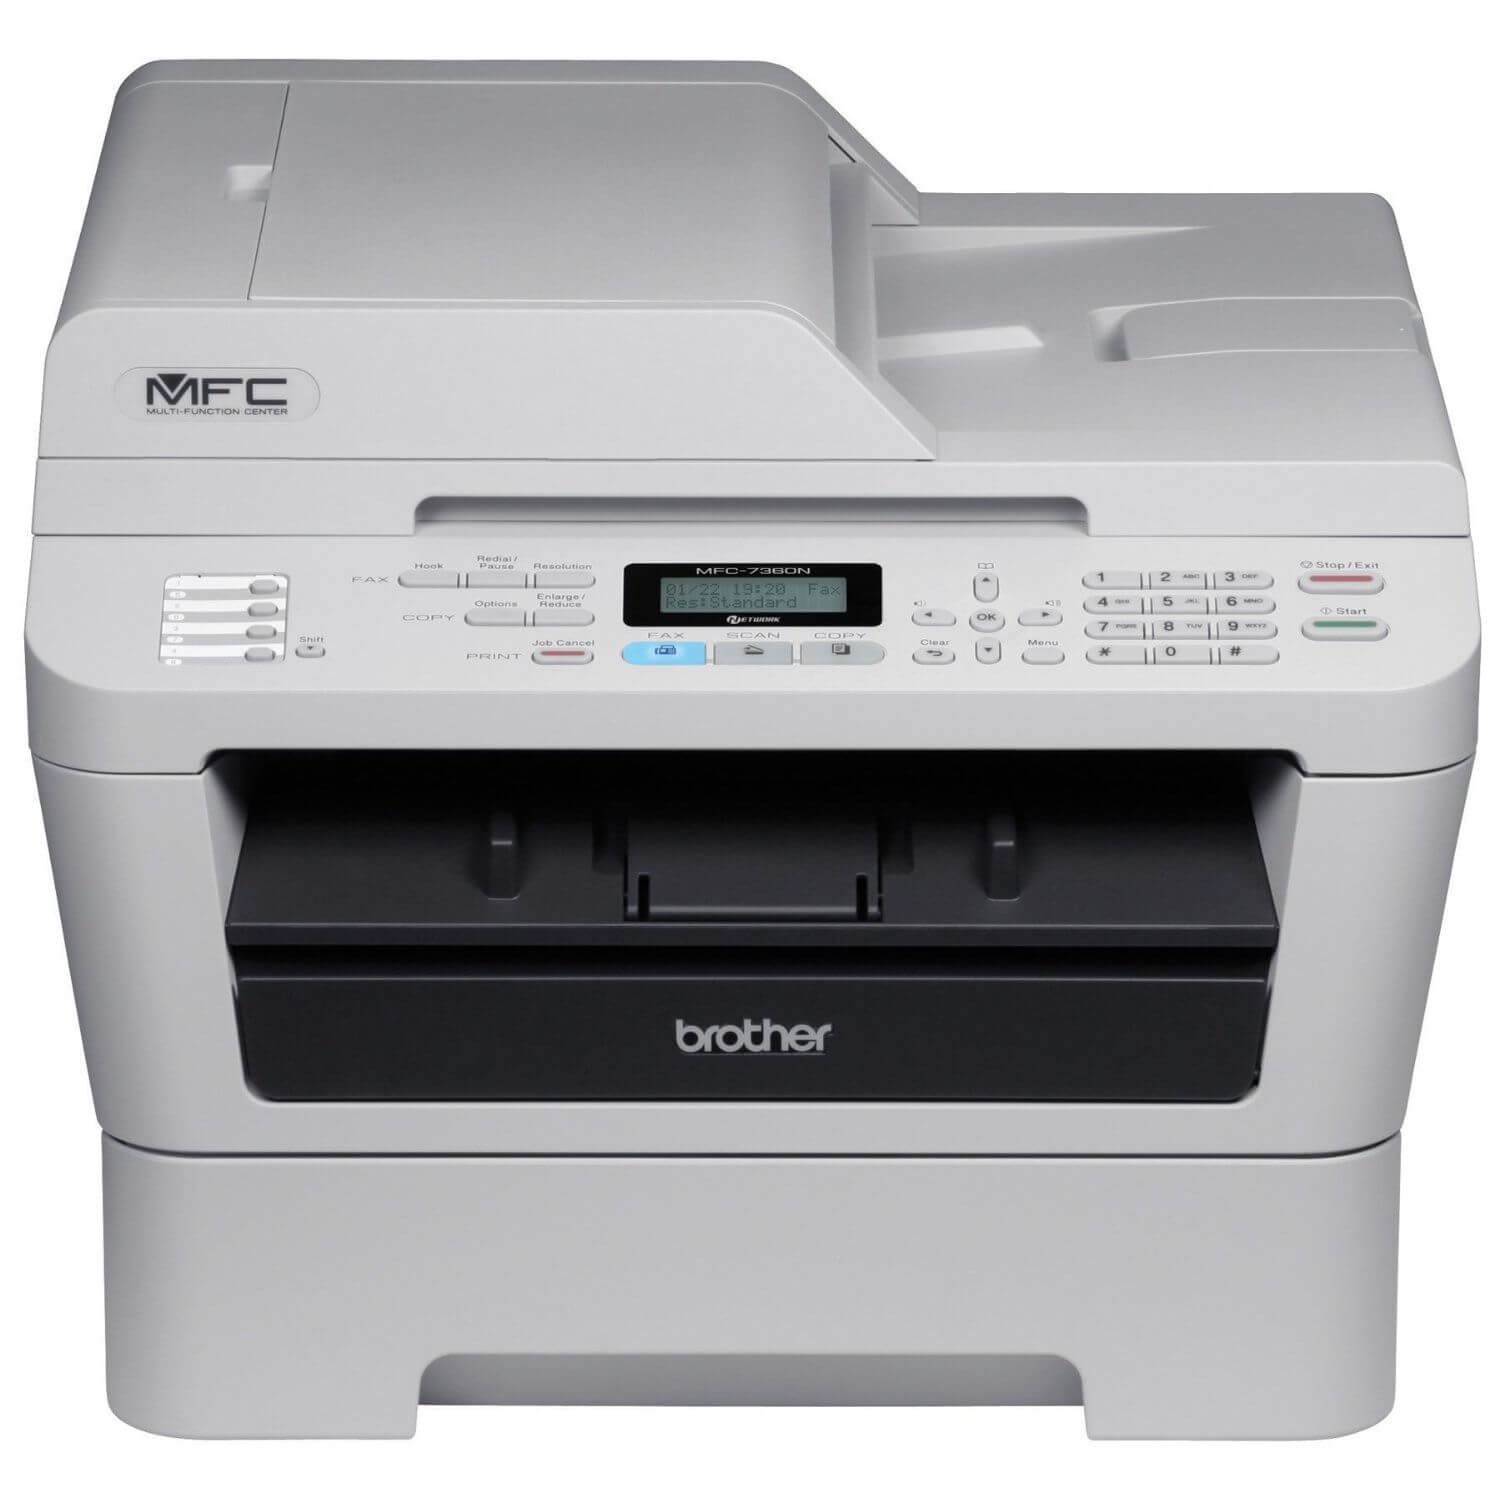 The MFC-7360N is a compact and affordable laser all-in-one ideal for small offices or home offices. It produces fast, high-quality monochrome laser printing and copying at up to 24ppm, as well as color scanning and faxing into one space-saving design. It also offers a built-in Ethernet interface for sharing with others on your network.The MFC-7360N provides flexible paper handling via an adjustable, 250-sheet capacity tray and a manual by-pass slot for printing thicker media. A 35-page capacity automatic document feeder allows you to copy, scan or fax multi-page documents quickly and easily. Additionally, it offers a high-yield 2,600-page replacement toner cartridge to help lower operating costs.what's in the box : Starter Toner Cartridge (yields approx. 700 pages), DR420 Drum Unit (yields approx. 12,000 pages), Quick Setup Guide and Basic User's Guide, AC Power Cord, Telephone Line Cord and Installation CD-ROM.